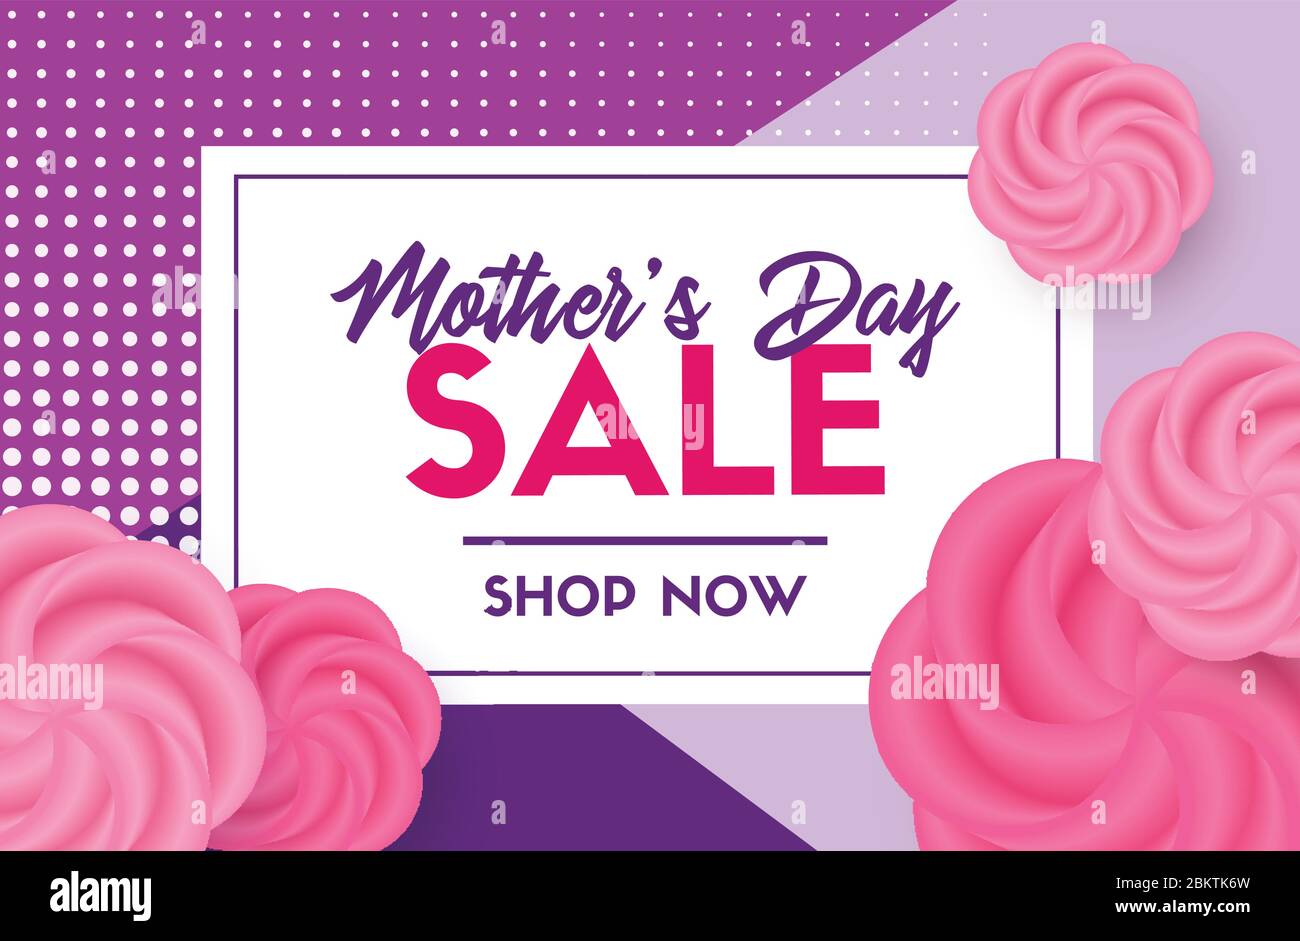 Mothers day sale vector card. Discount template Stock Vector